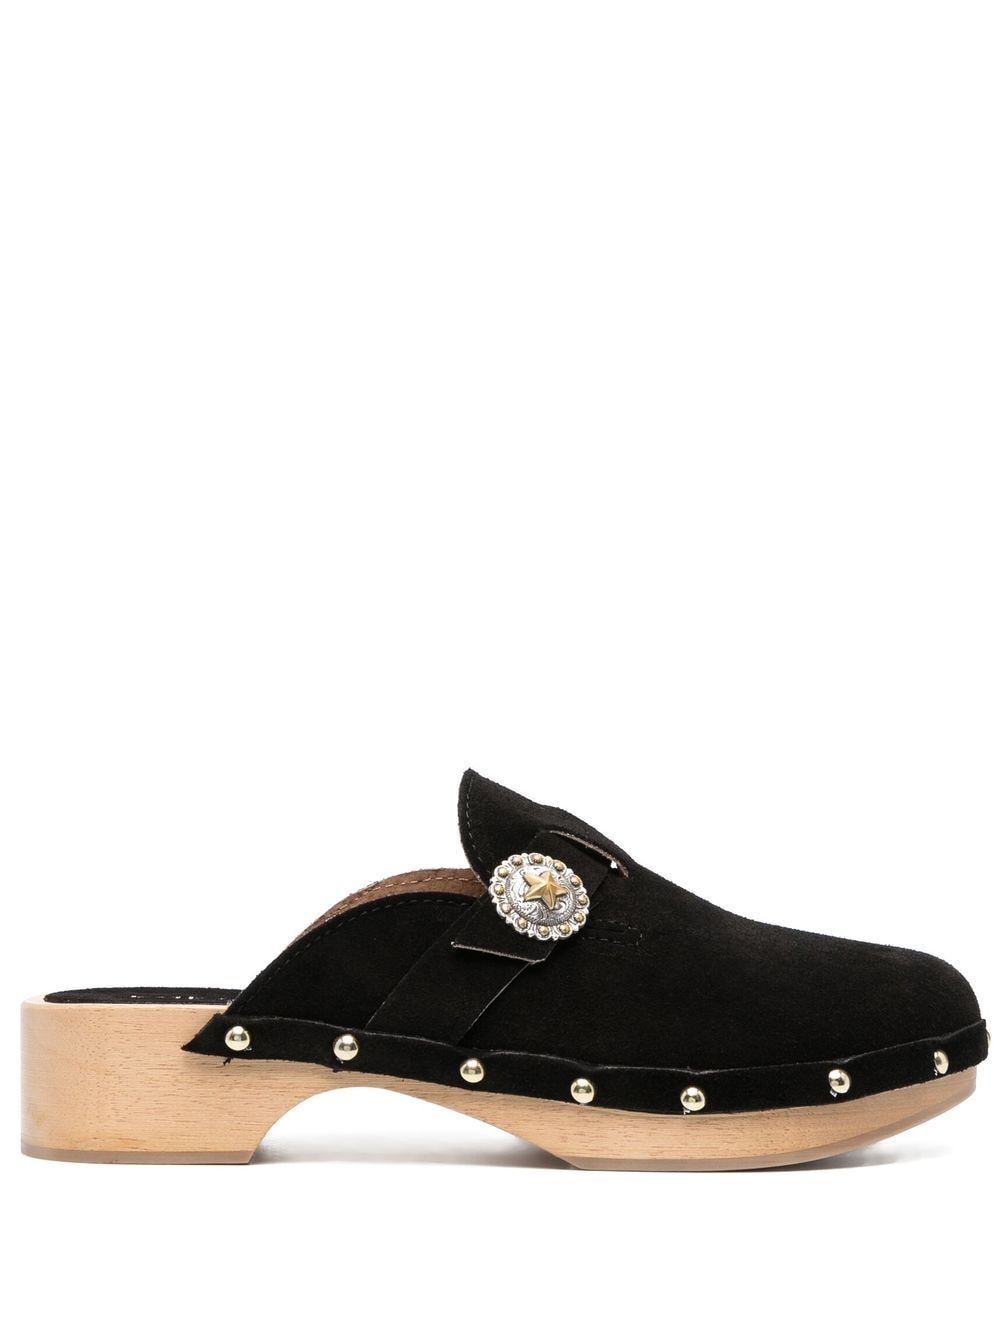 Kate cate KATE CATE- Allegra Suede Clogs